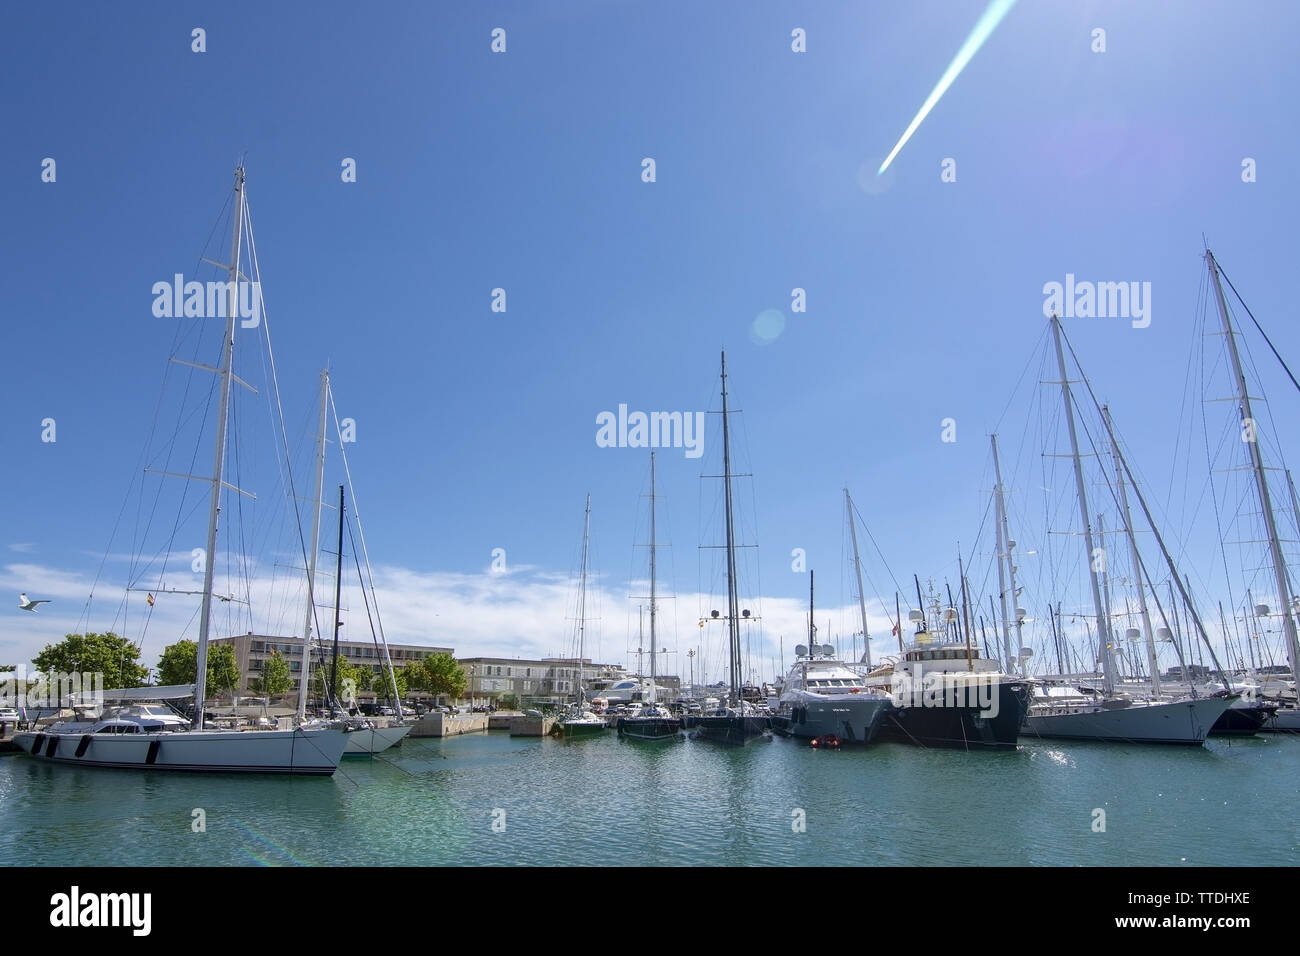 PALMA, MALLORCA, SPAIN - MAY 20, 2019: Old Palma harbor Moll Vell with moored large yachts and vessels on a sunny day on May 20, 2019 in Palma, Mallor Stock Photo